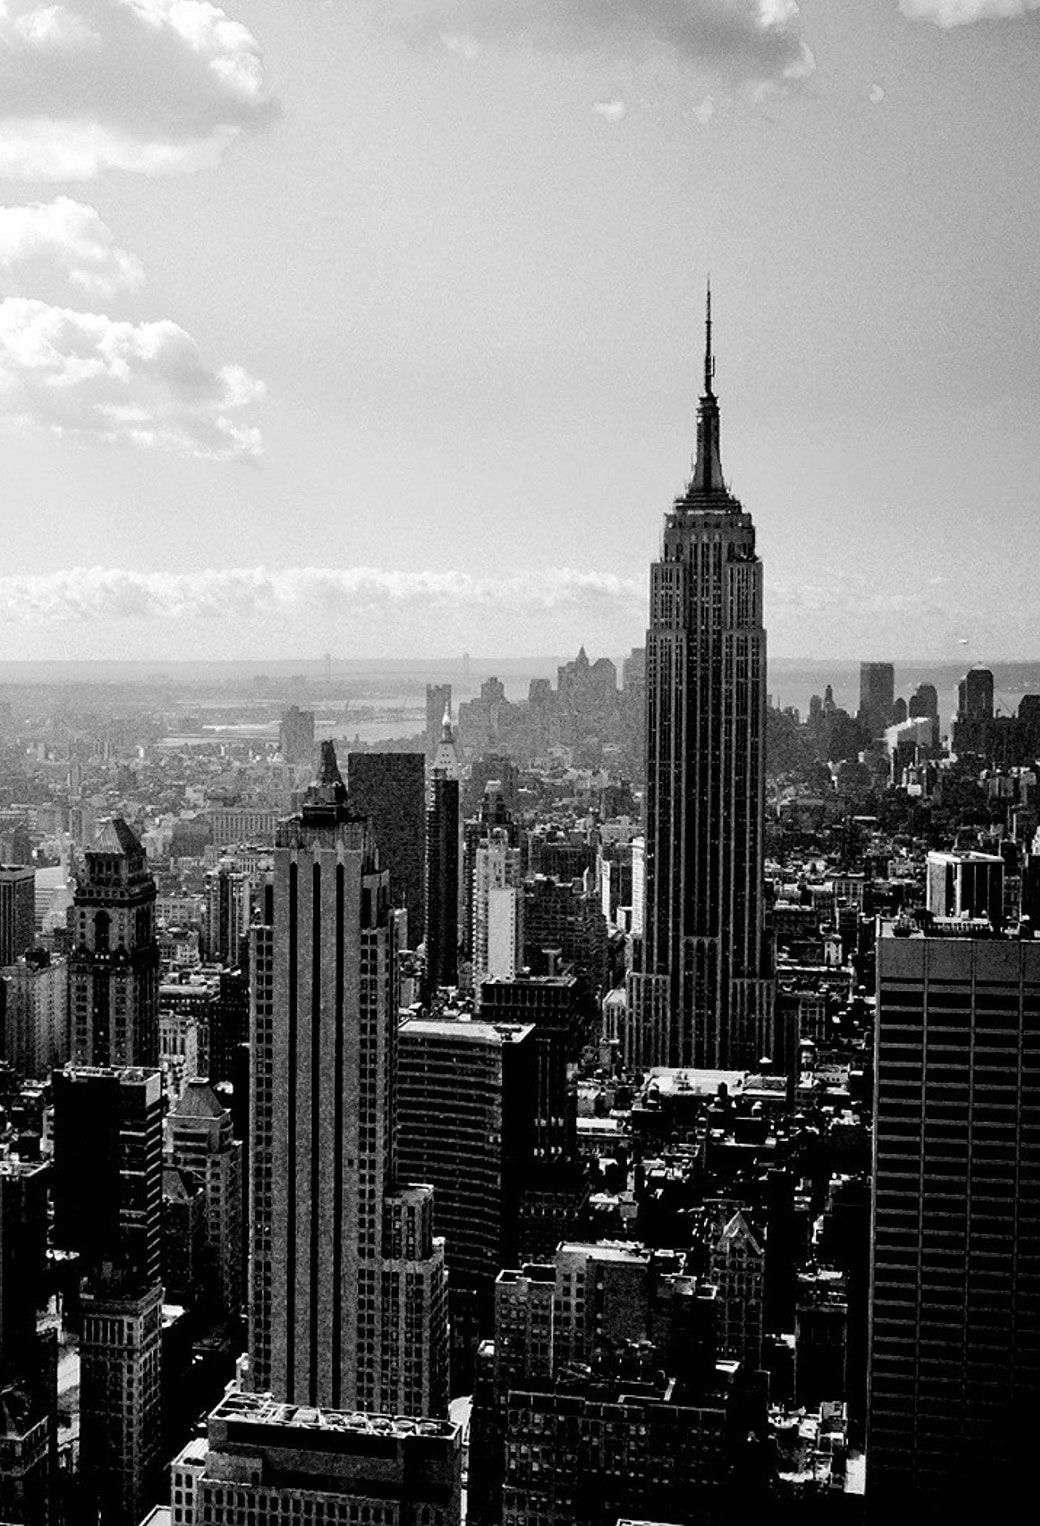 New York Iphone Wallpapers Wallpaper Cave